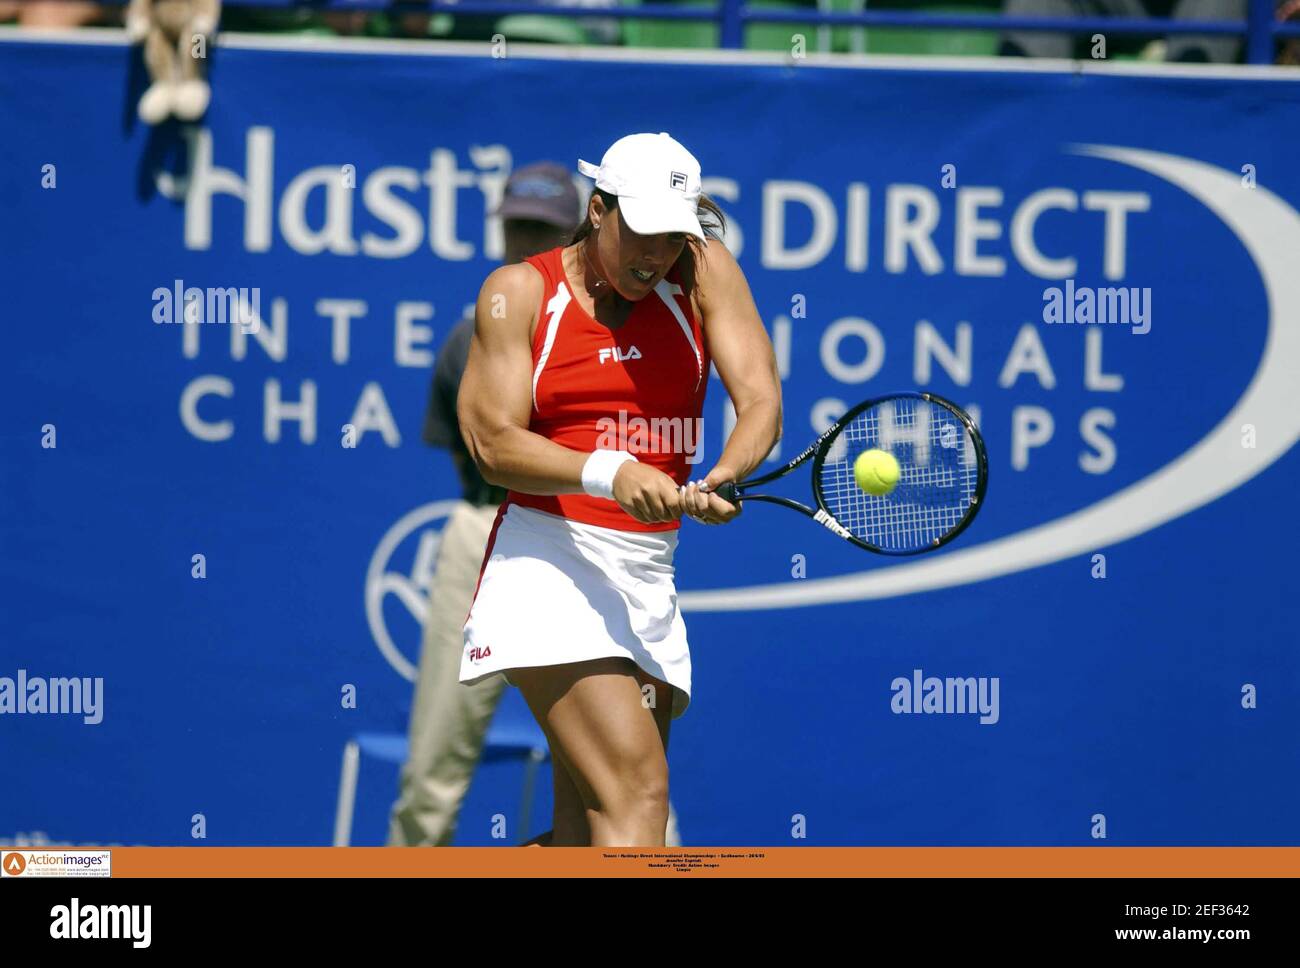 Tennis - Hastings Direct International Championships - Eastbourne - 20/6/03  Jennifer Capriati Mandatory Credit: Action Images / Rudy Lhomme Livepic  Stock Photo - Alamy